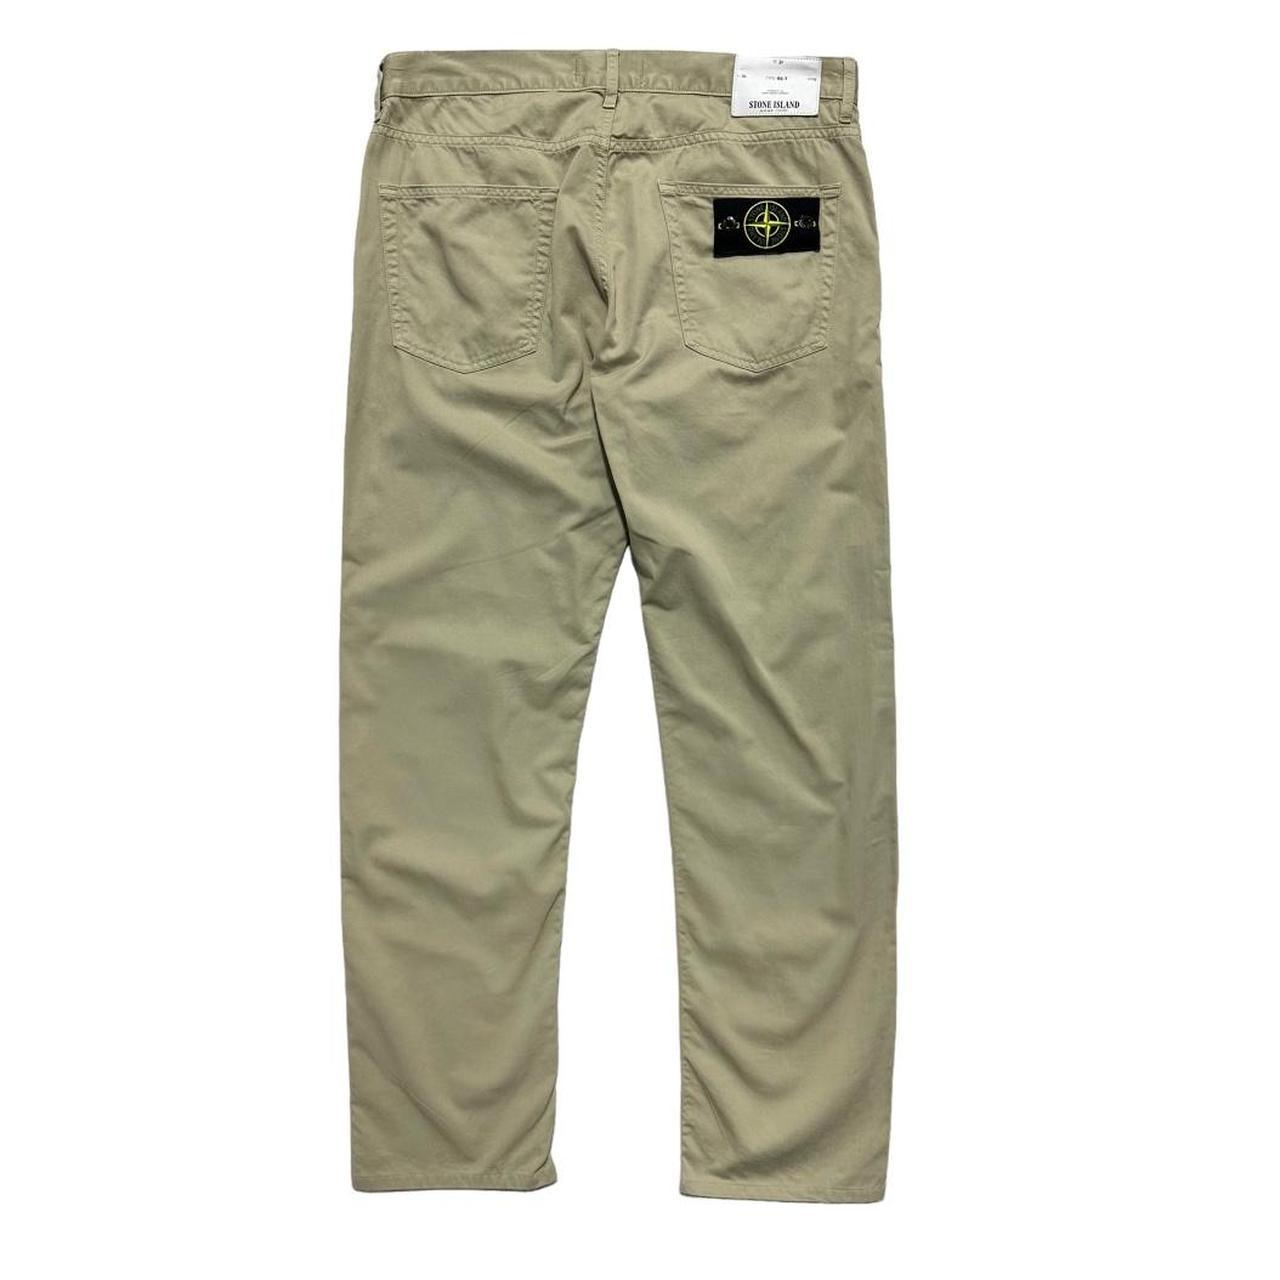 Stone Island Tan Trousers - Known Source